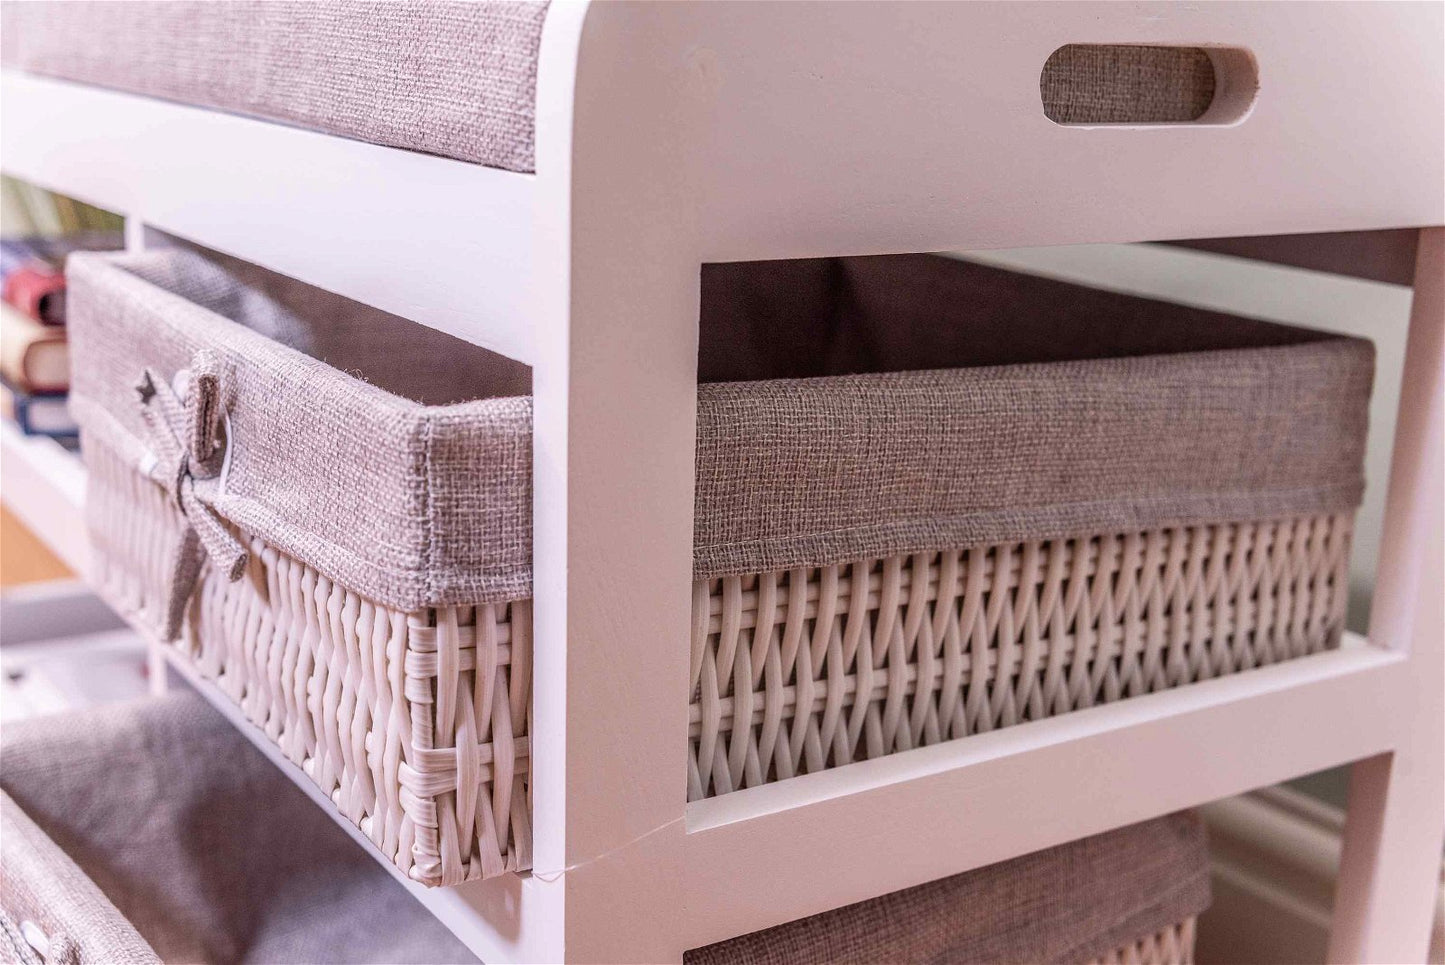 Laxey White Bench With Shoe Rack & Drawers - Kaftan direct